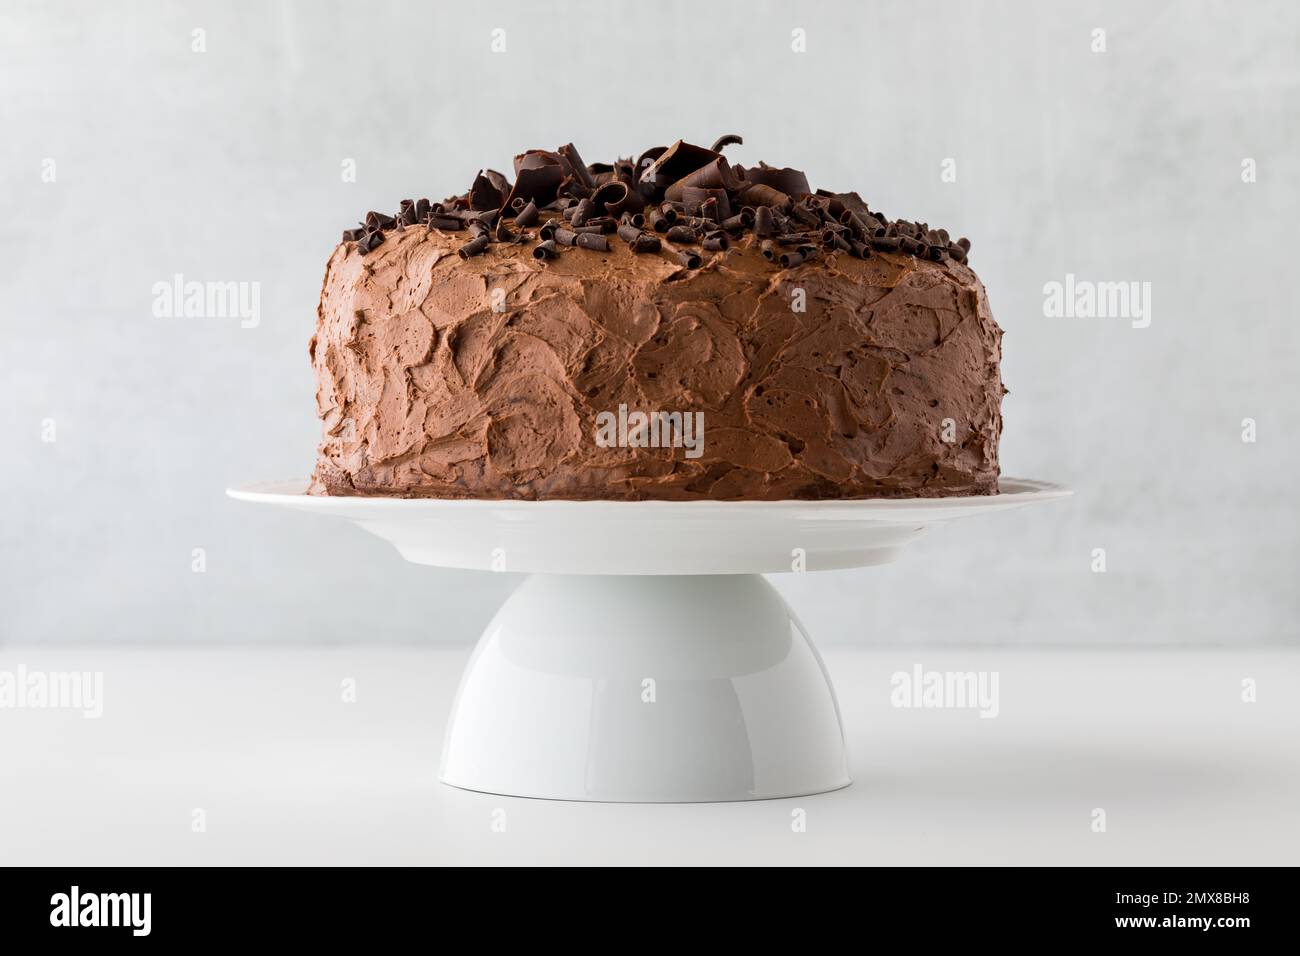 Front facing view of a large chocolate cake decorated with chocolate curls. Stock Photo